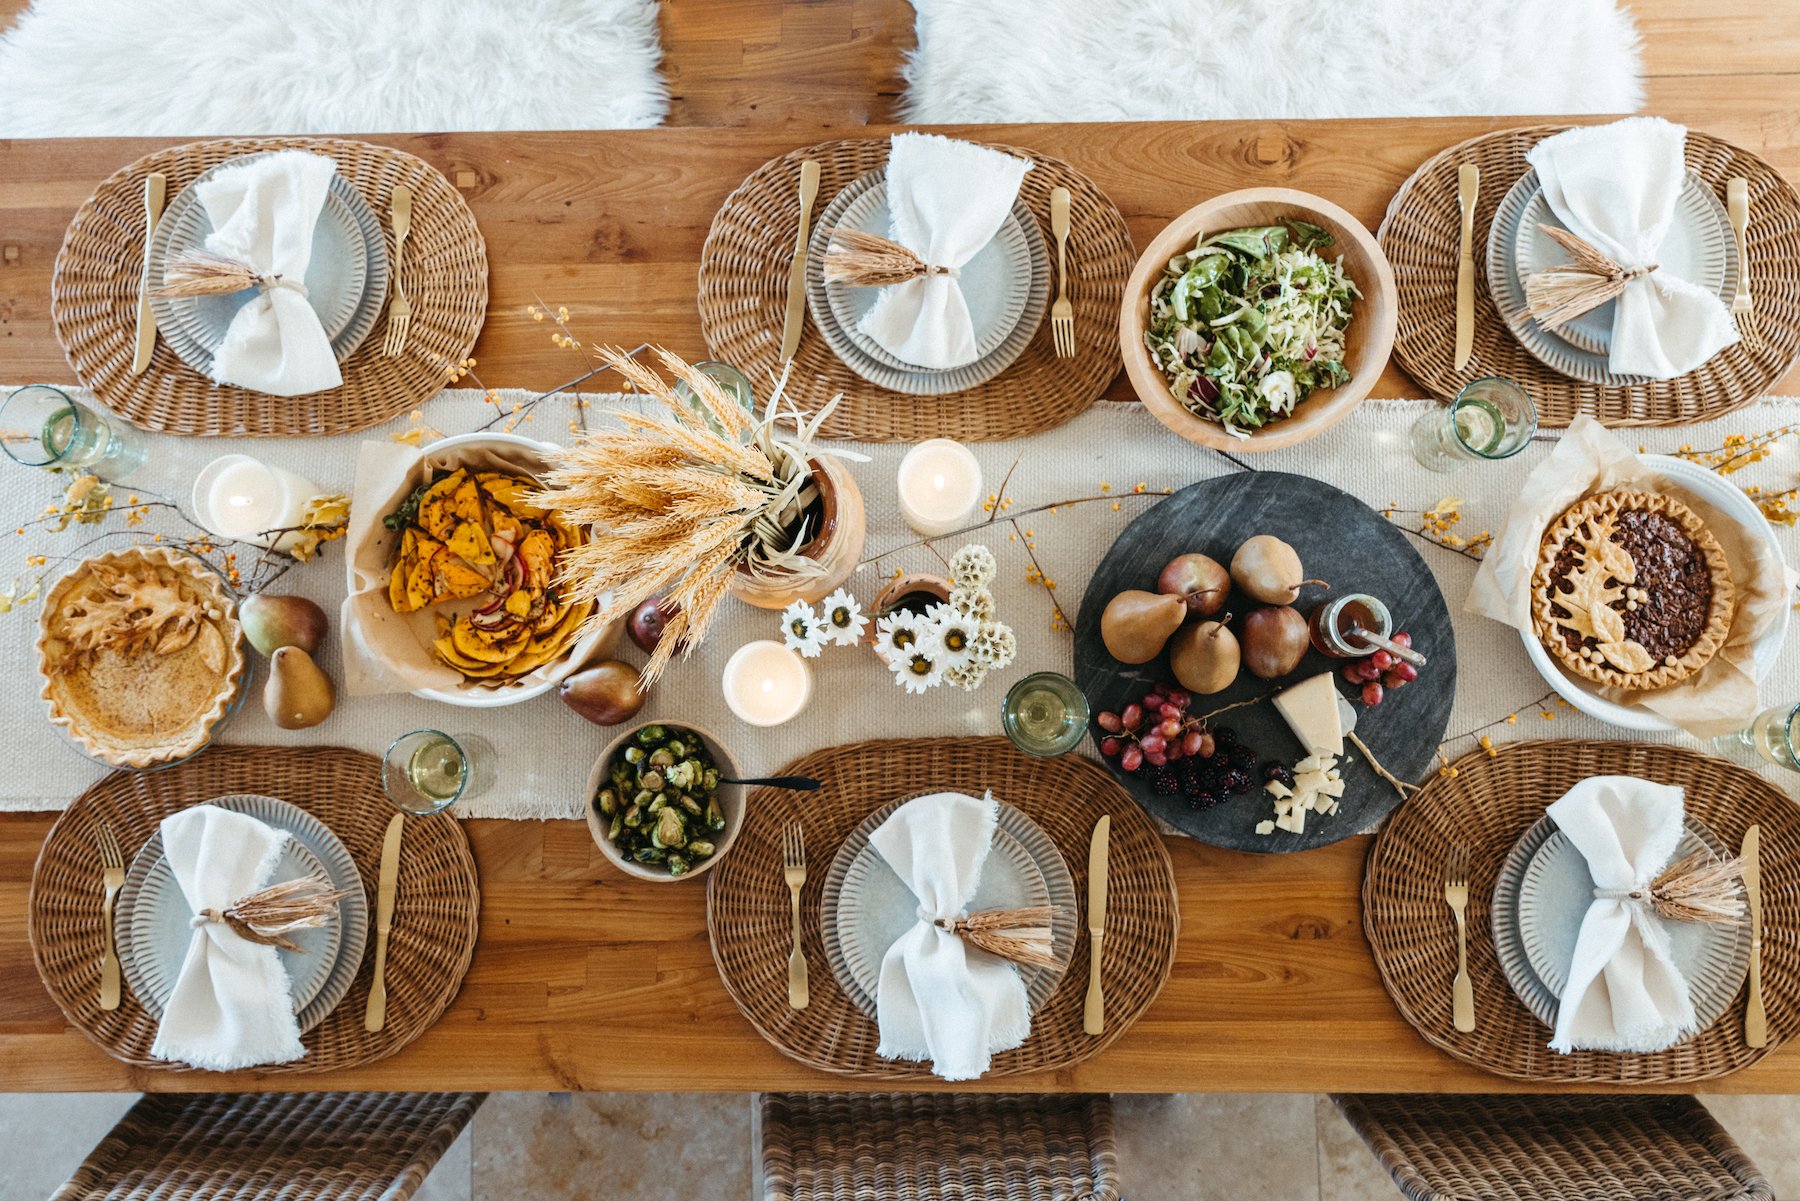 10 Design Trends to Steal for your Thanksgiving Table Decor